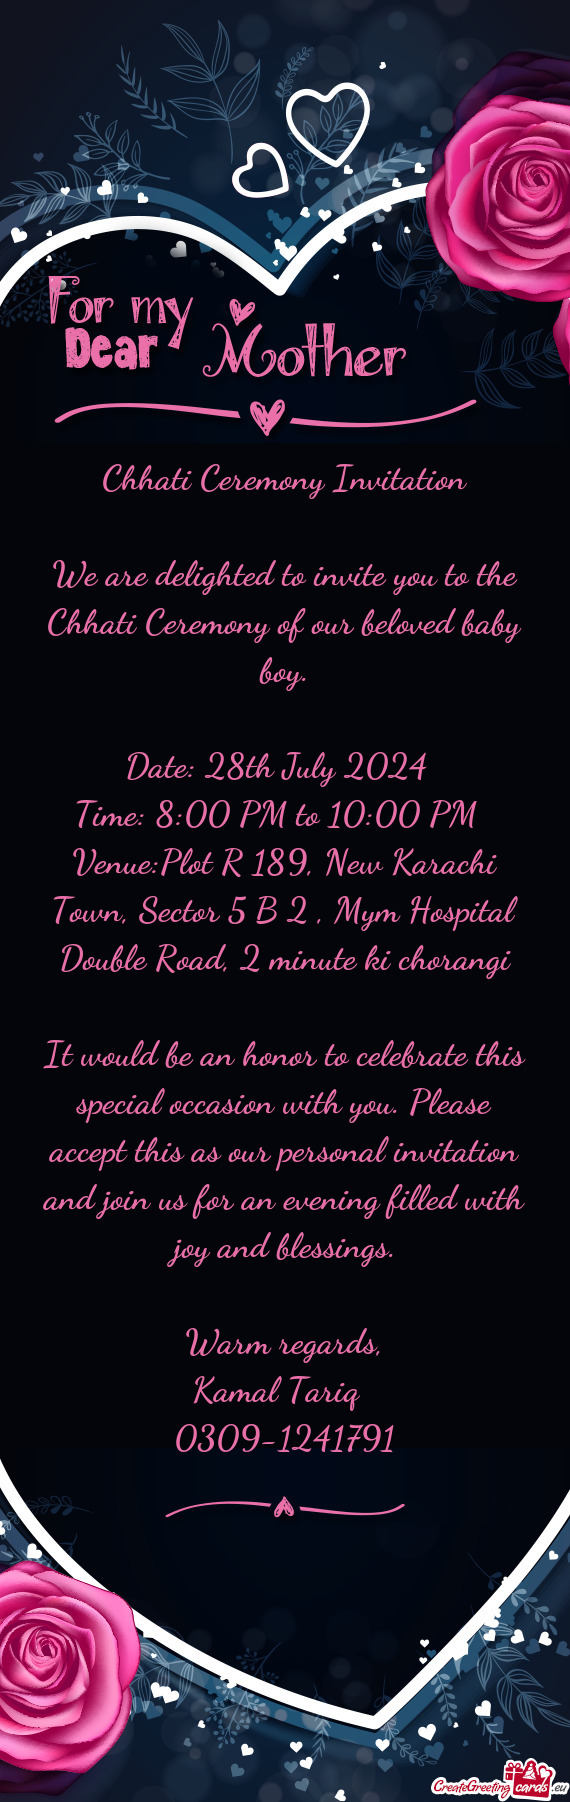 We are delighted to invite you to the Chhati Ceremony of our beloved baby boy